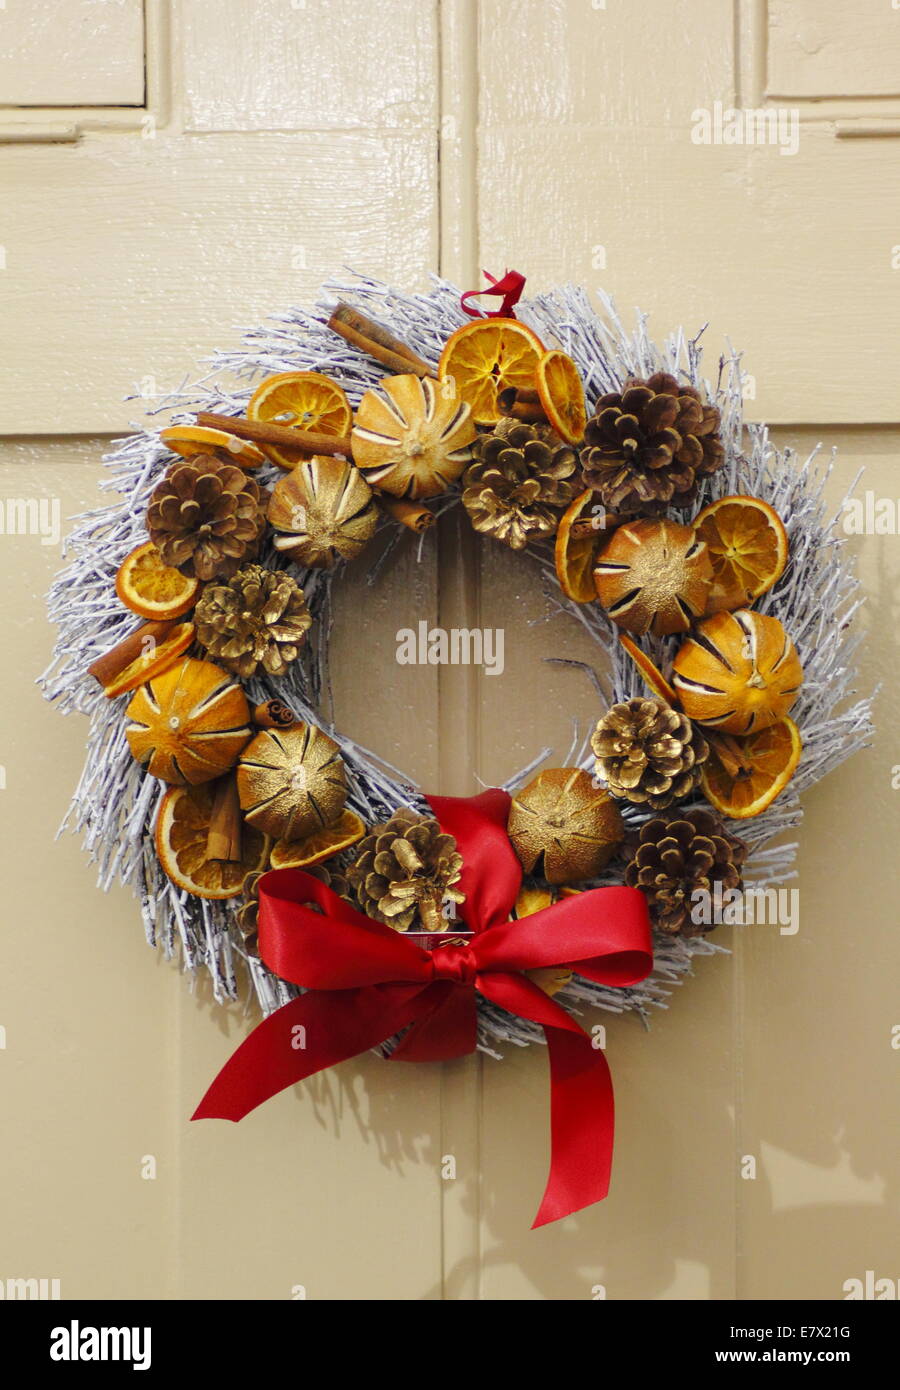 Natural Christmas wreath featuring dried fruits & cinnamon sticks hangs on a painted wooden door, Peak District Derbyshire UK Stock Photo